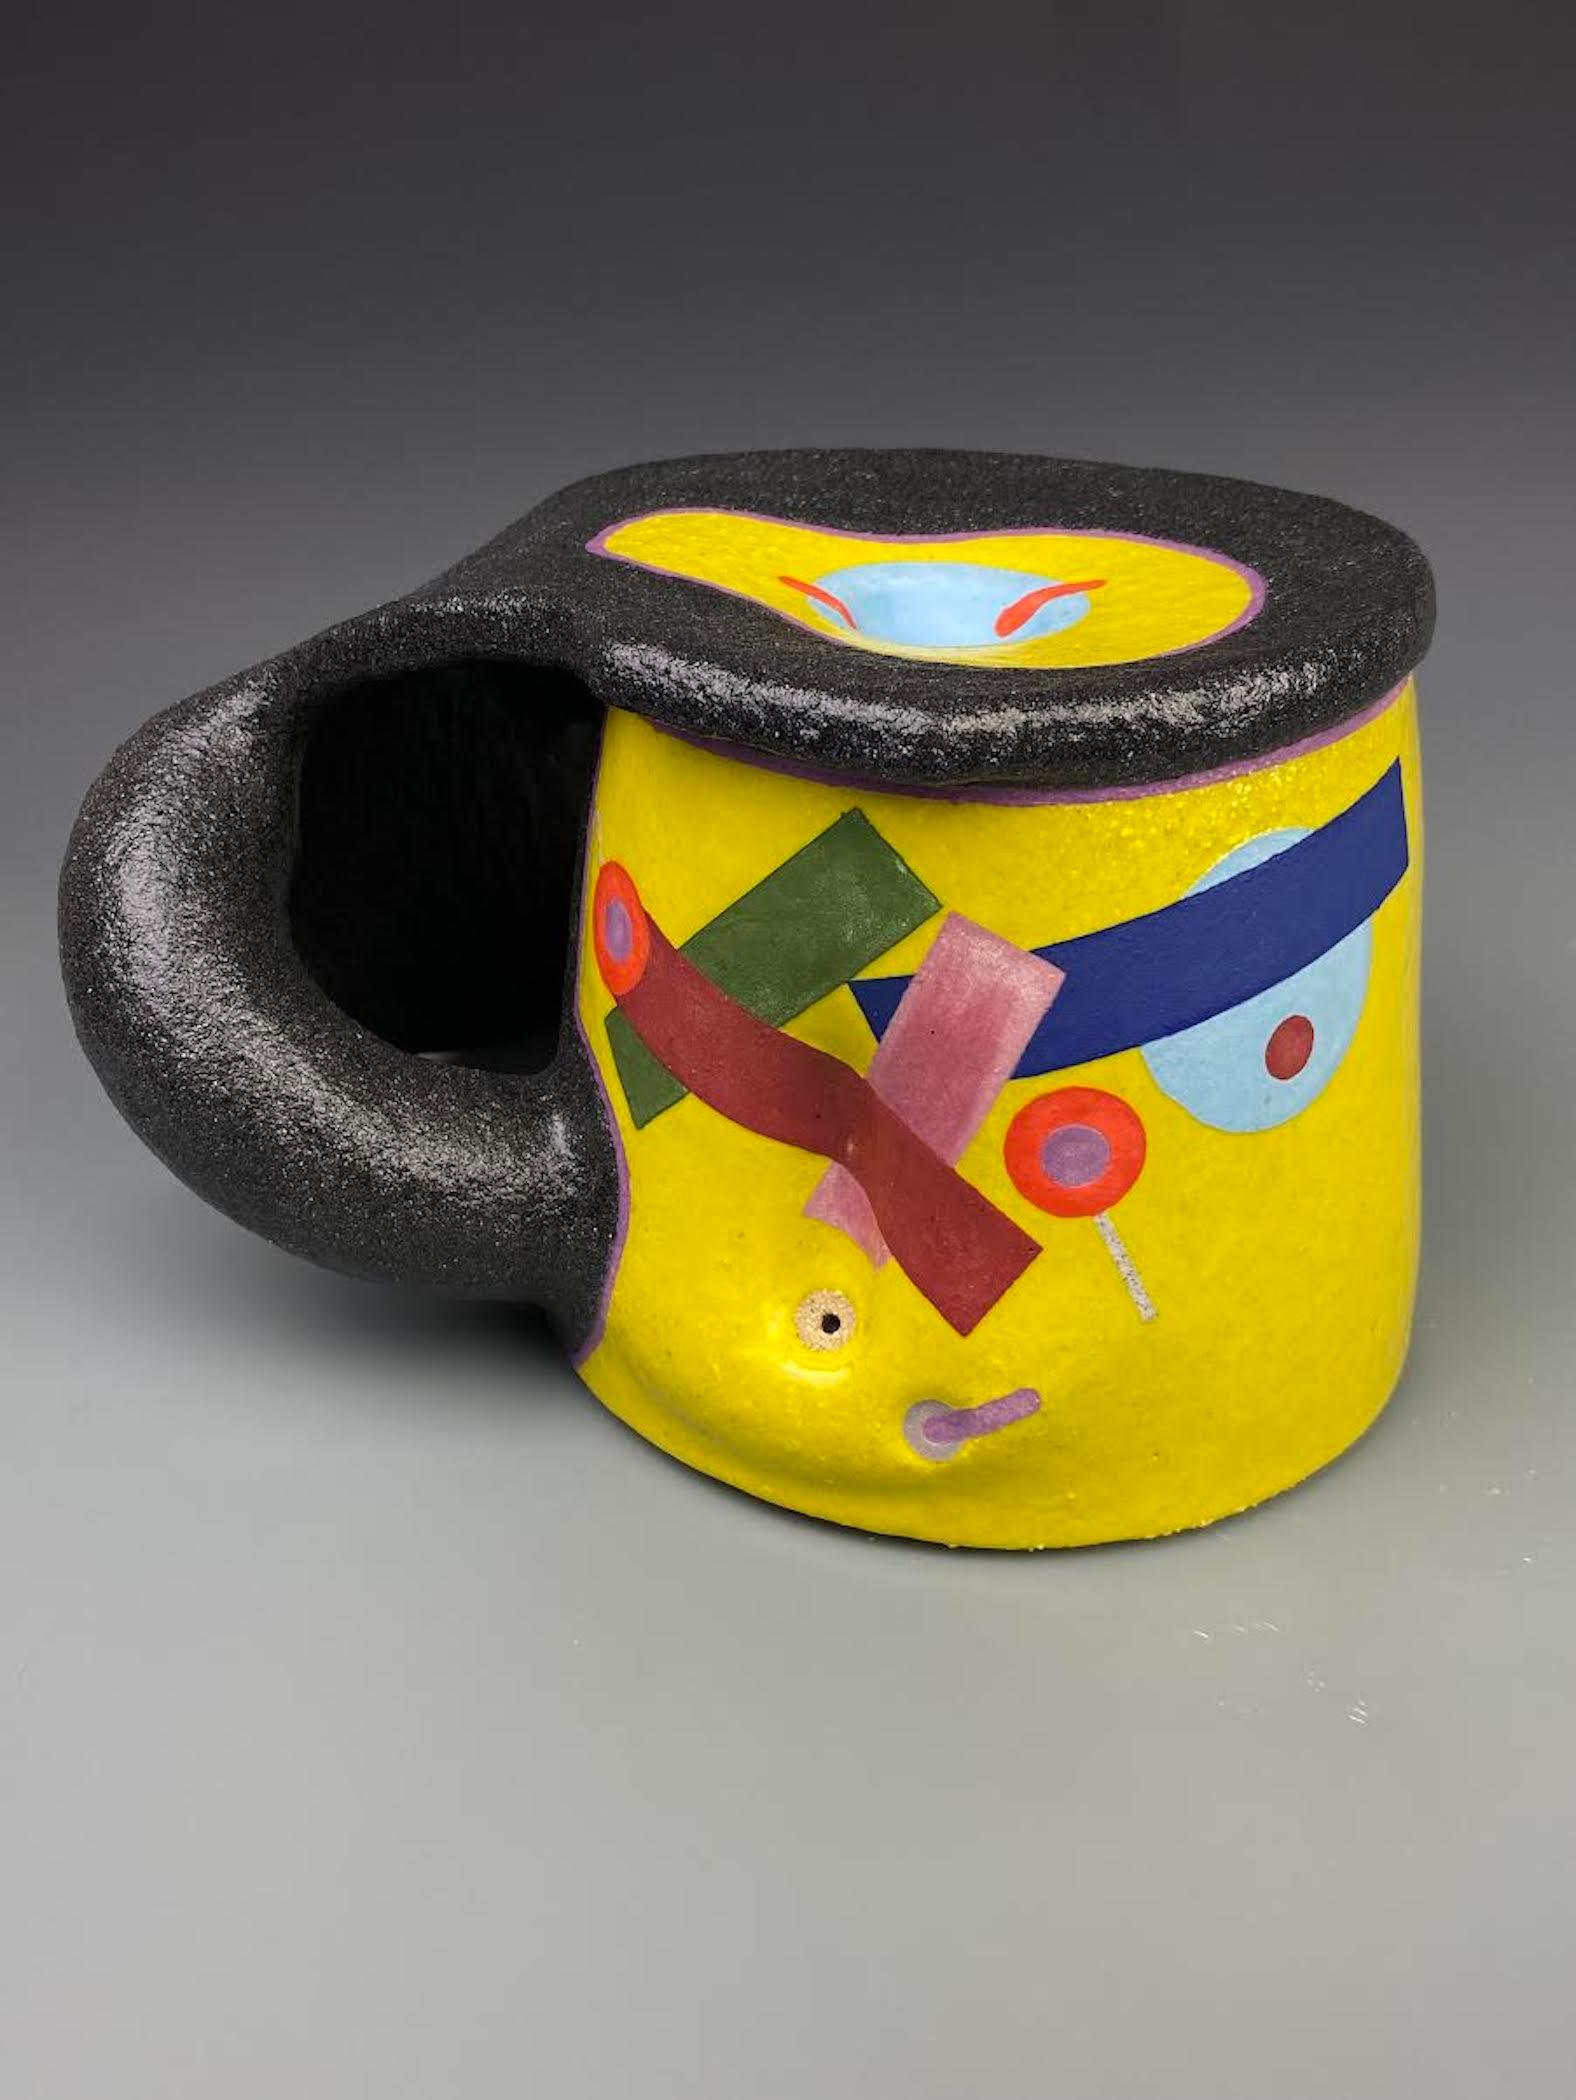 Abstract Sculpture José Sierra - "AM09", Contemporary, Abstract, Ceramic, Sculpture, Stoneware, Glaze, Colorful